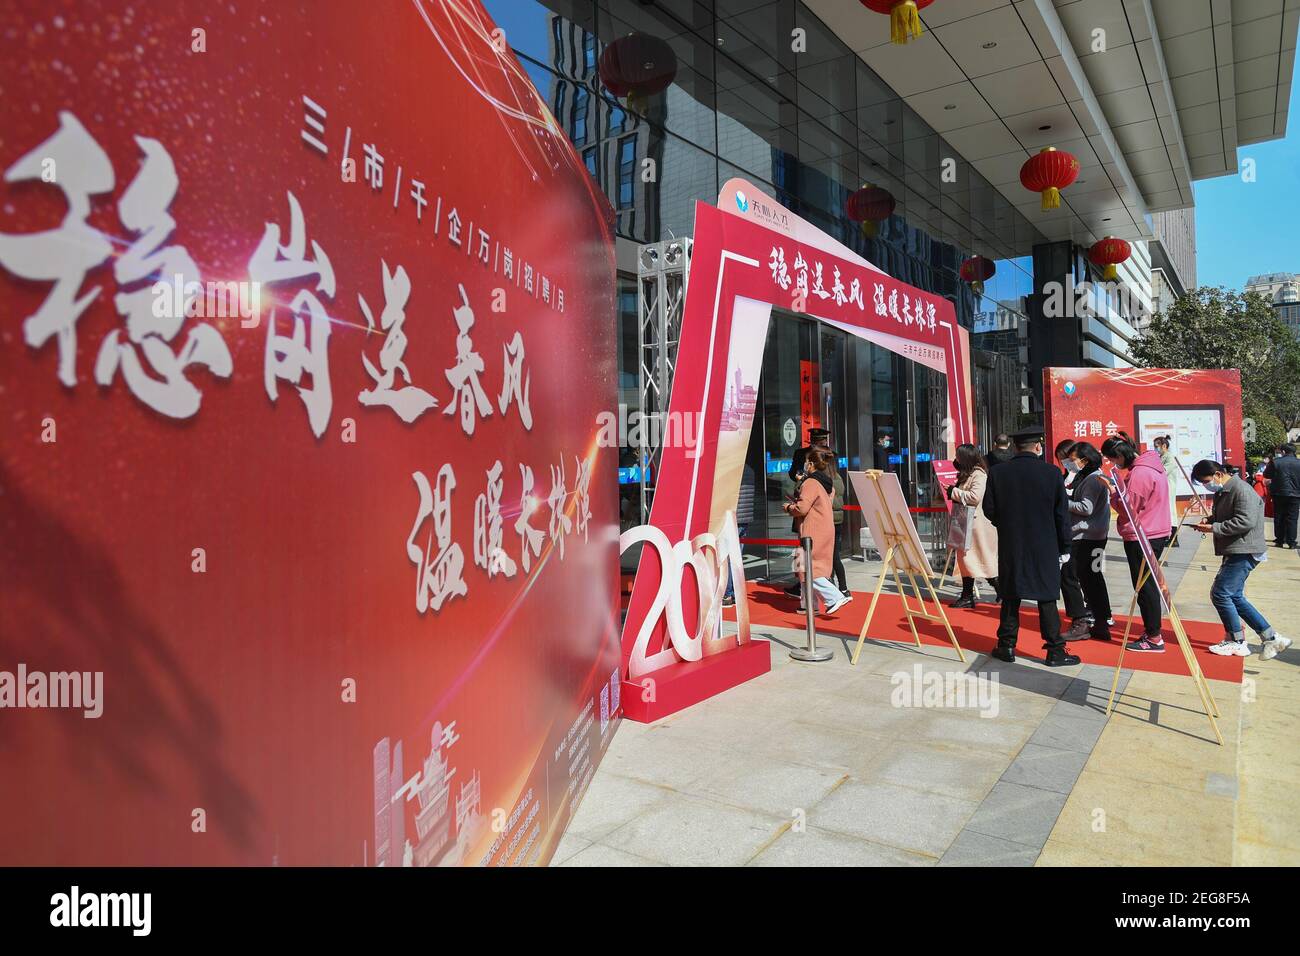 Changsha, China, 18 Feb 2021: Applicants pass the entrance in line on a job fair at the Tianxin cultural industry park in Changsha, central China's Hunan Province, Feb. 18, 2021. The job fair, sponsored by the authority of Tianxin District of Changsha with assistance from authorities of Shifeng District of Zhuzhou City and Yuetang District of Xiangtan City, all in Hunan, took place in both on-line and off-line forms, and covered a variety of sectors such as software, culture and advertisement, smart manufacturing, and medicine and health. (Xinhua/Chen Zeguo) Credit: Xinhua/Alamy Live News Stock Photo